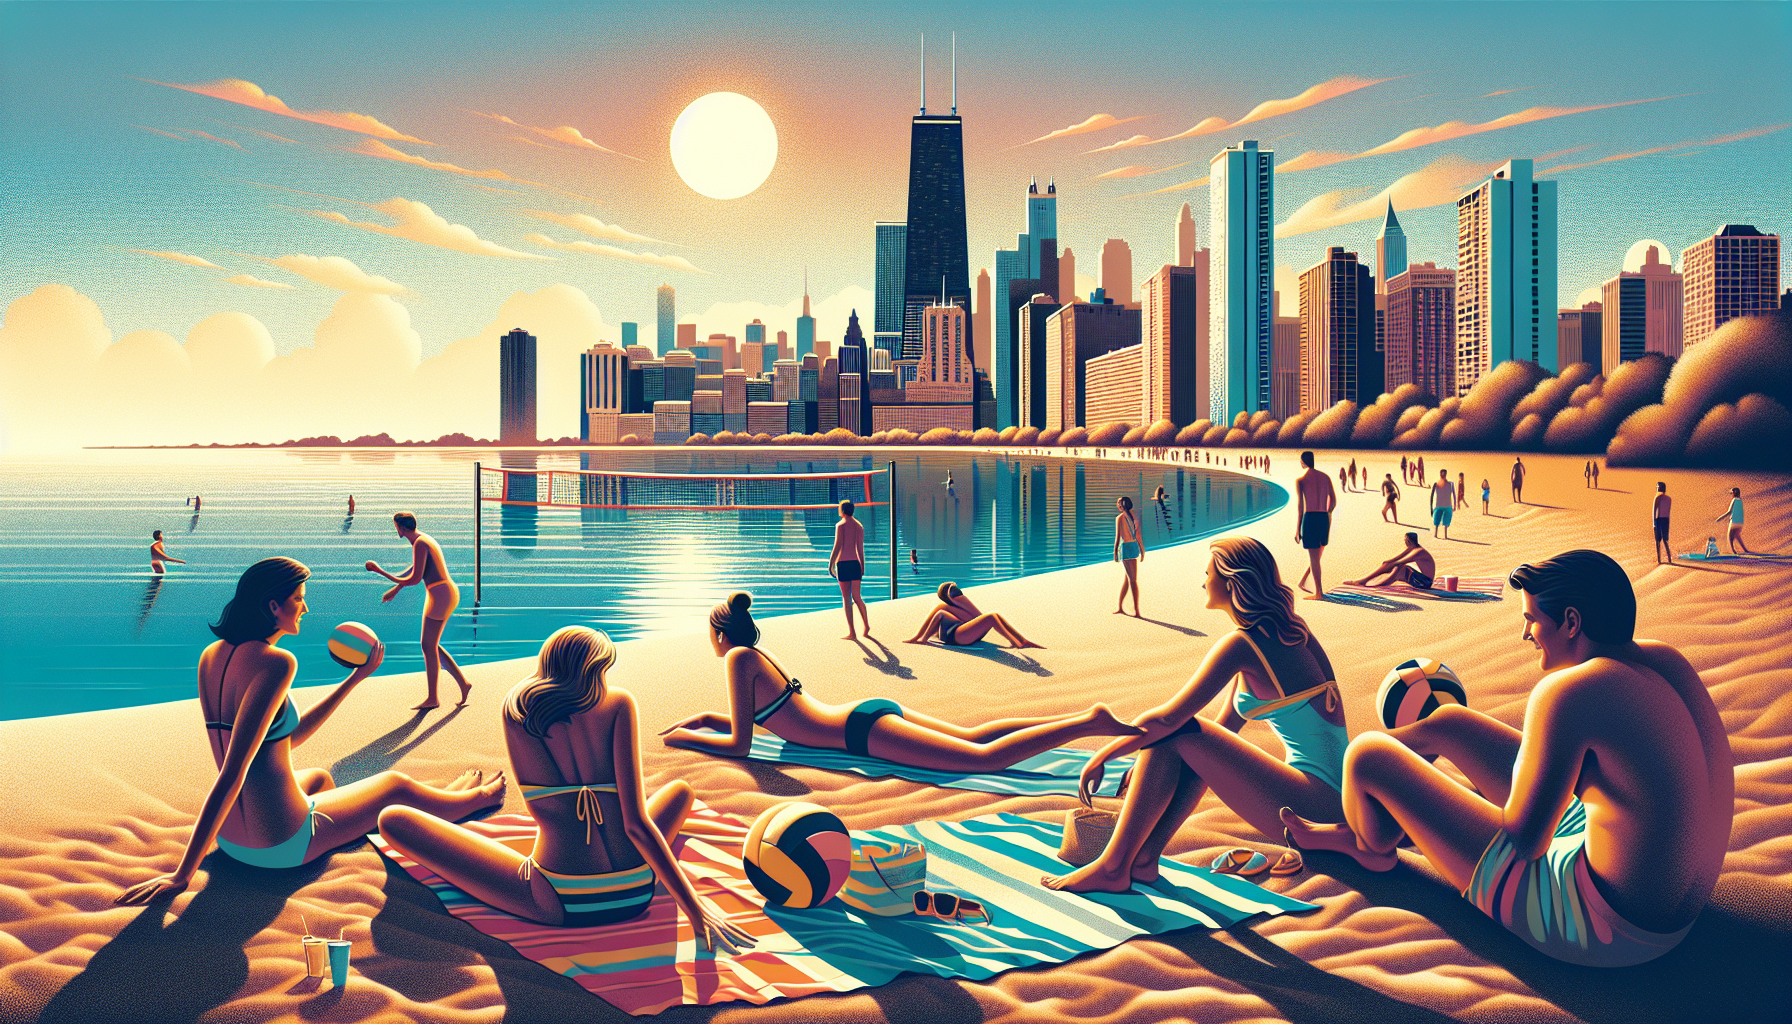 Illustration of Oak Street Beach with the Chicago skyline in the background